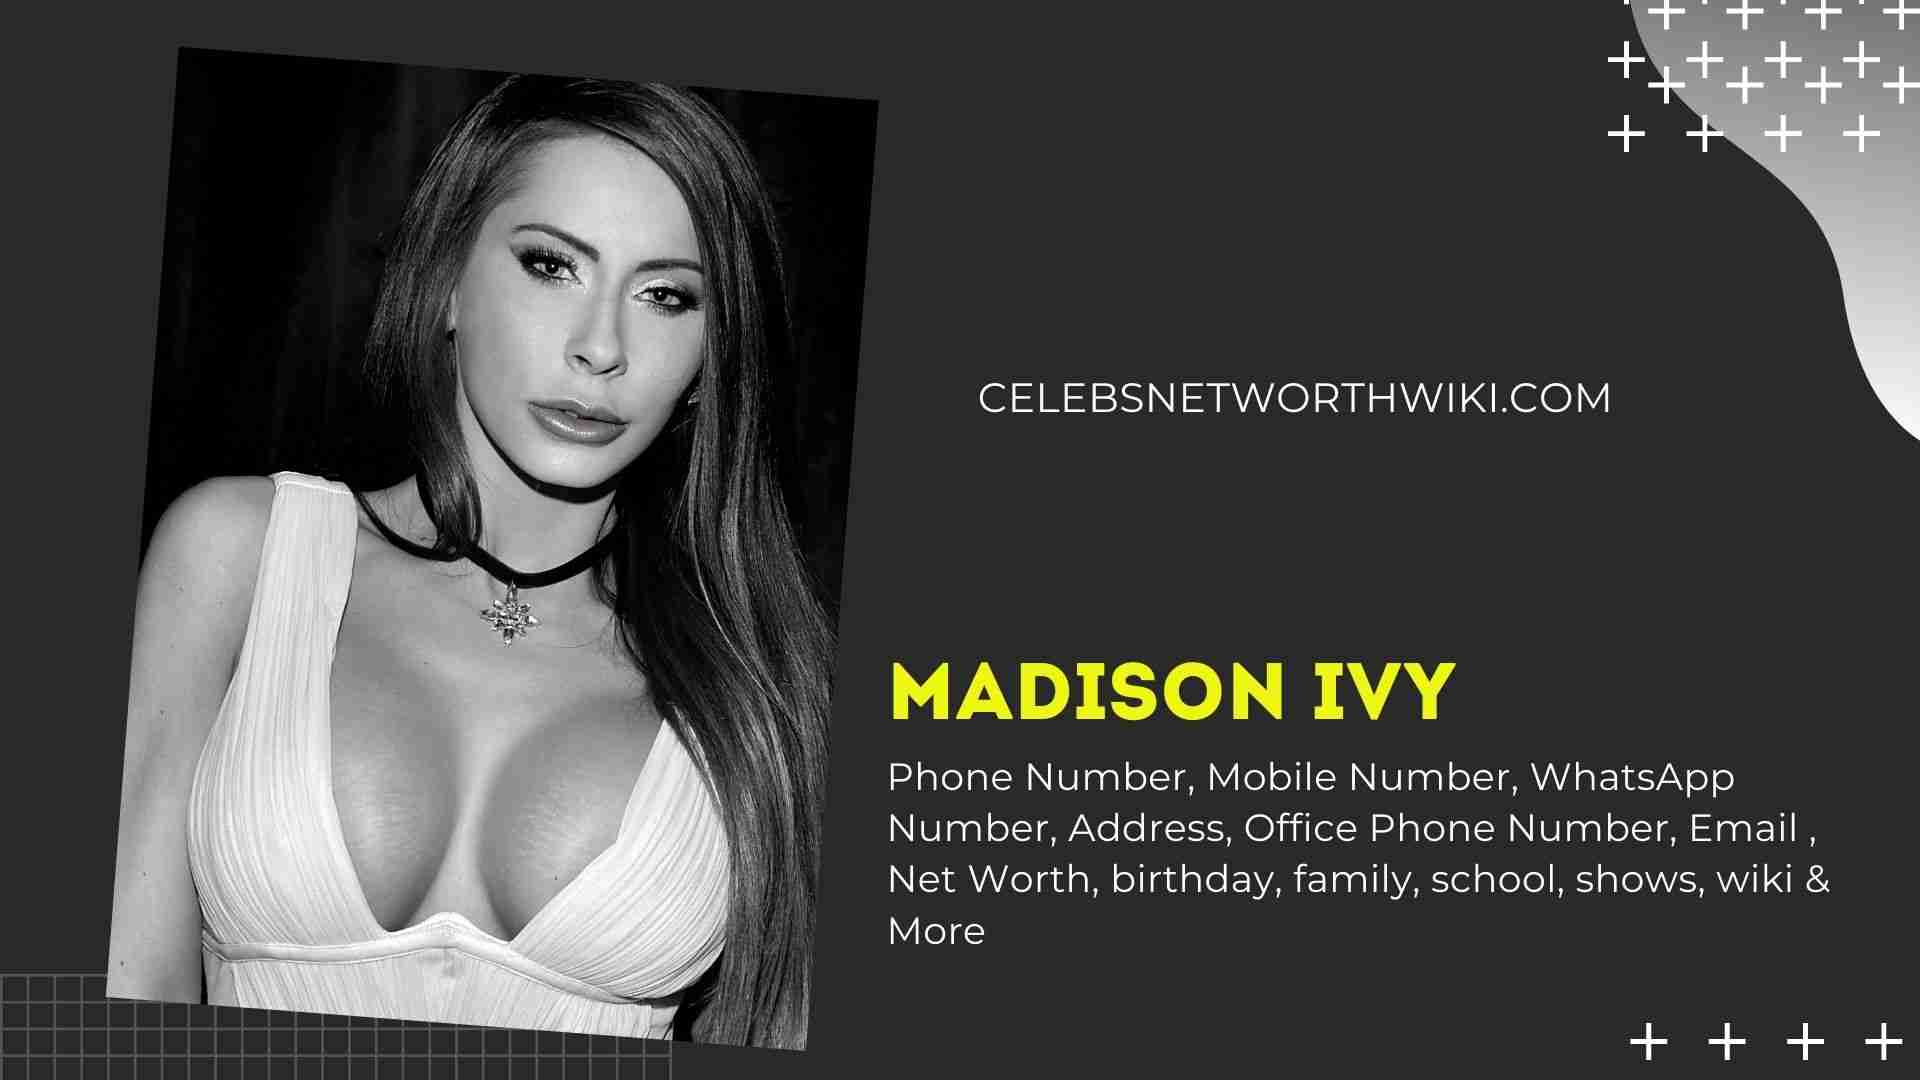 Madison ivy official